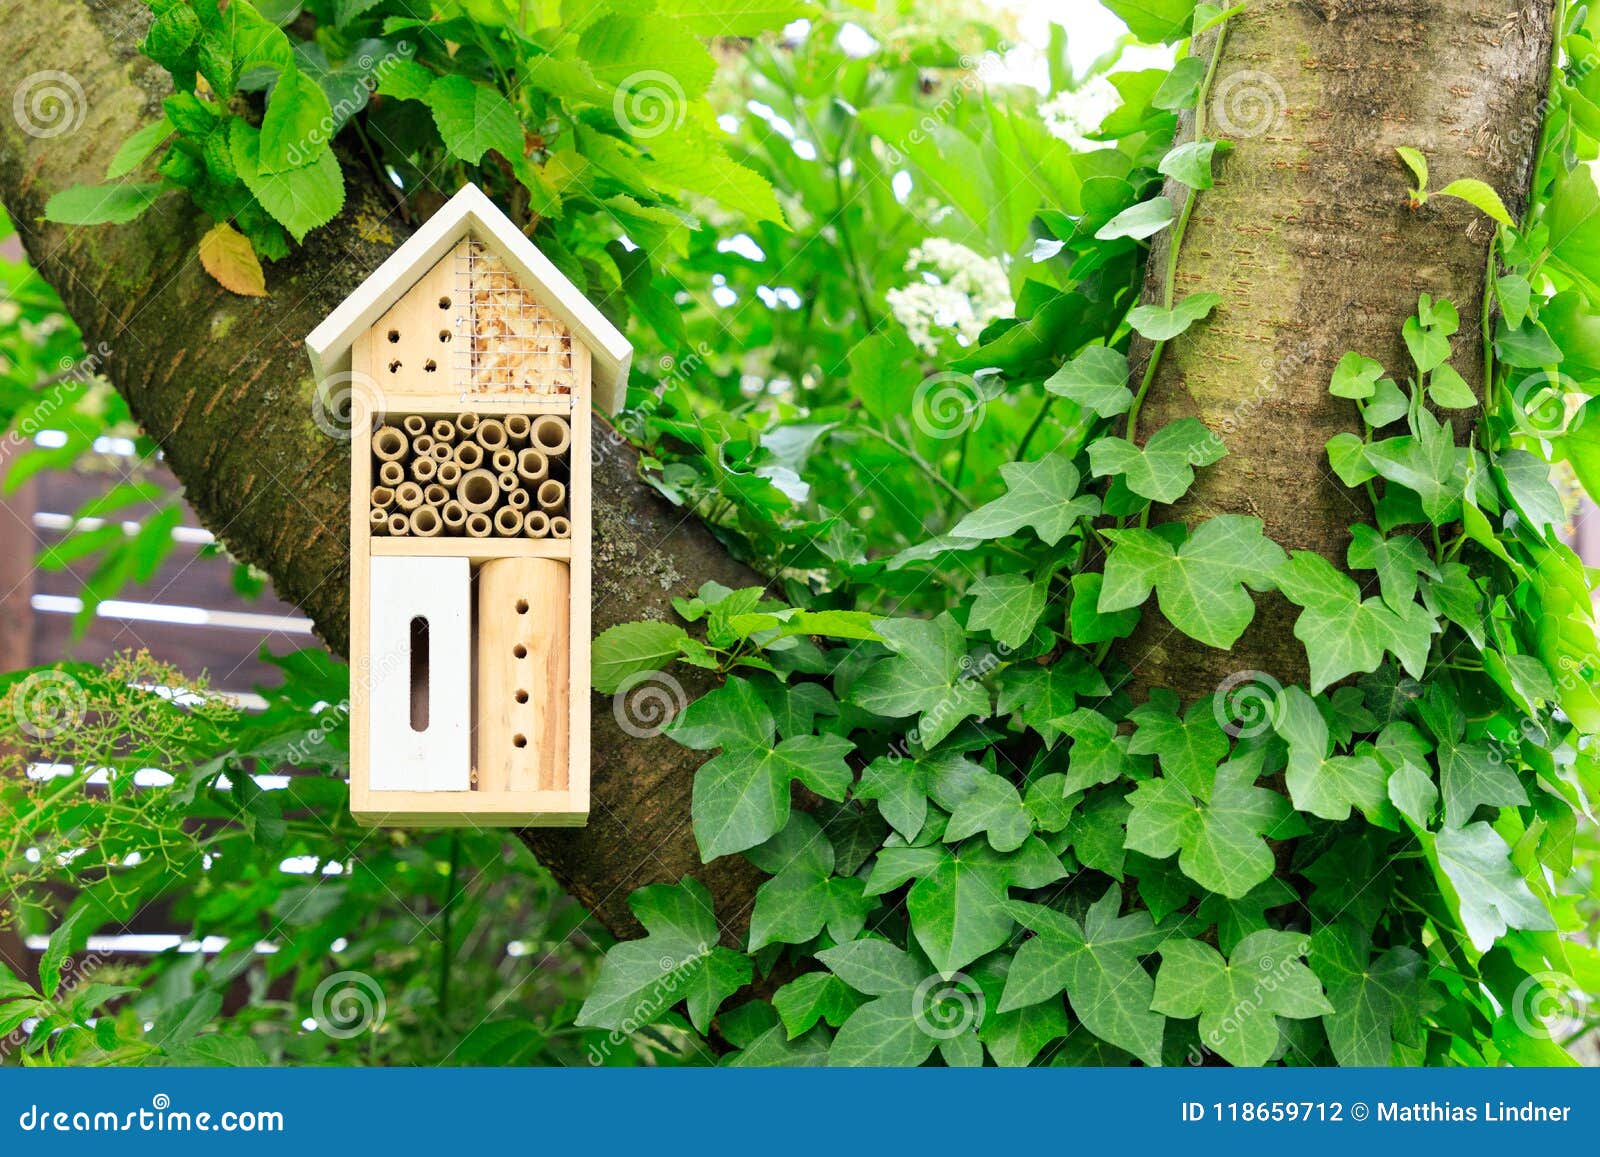 a wooden insect hotel in the tree